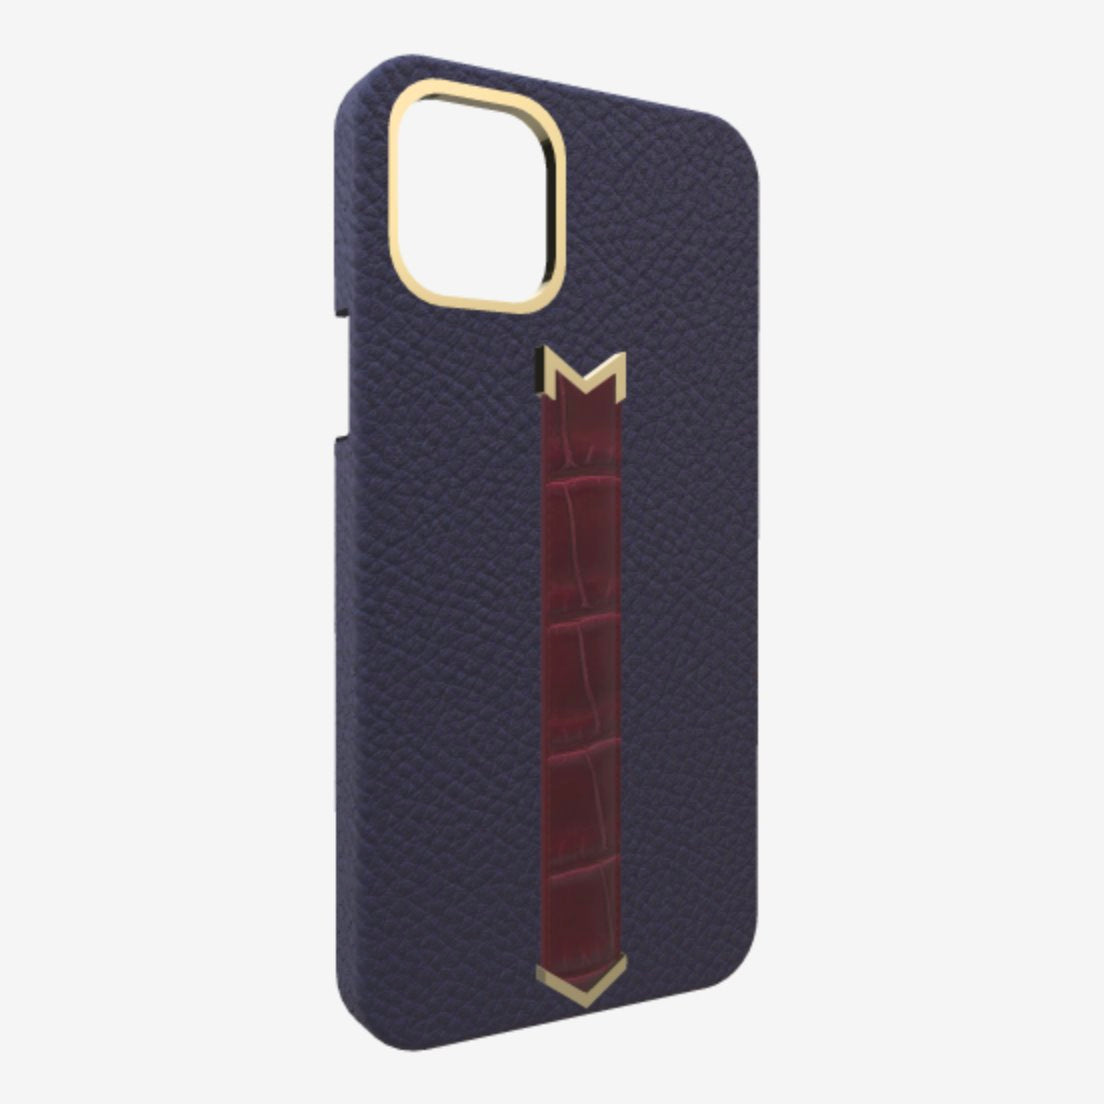 Gold Finger Strap Case for iPhone 13 Pro in Genuine Calfskin and Alligator Navy Blue Burgundy Palace 